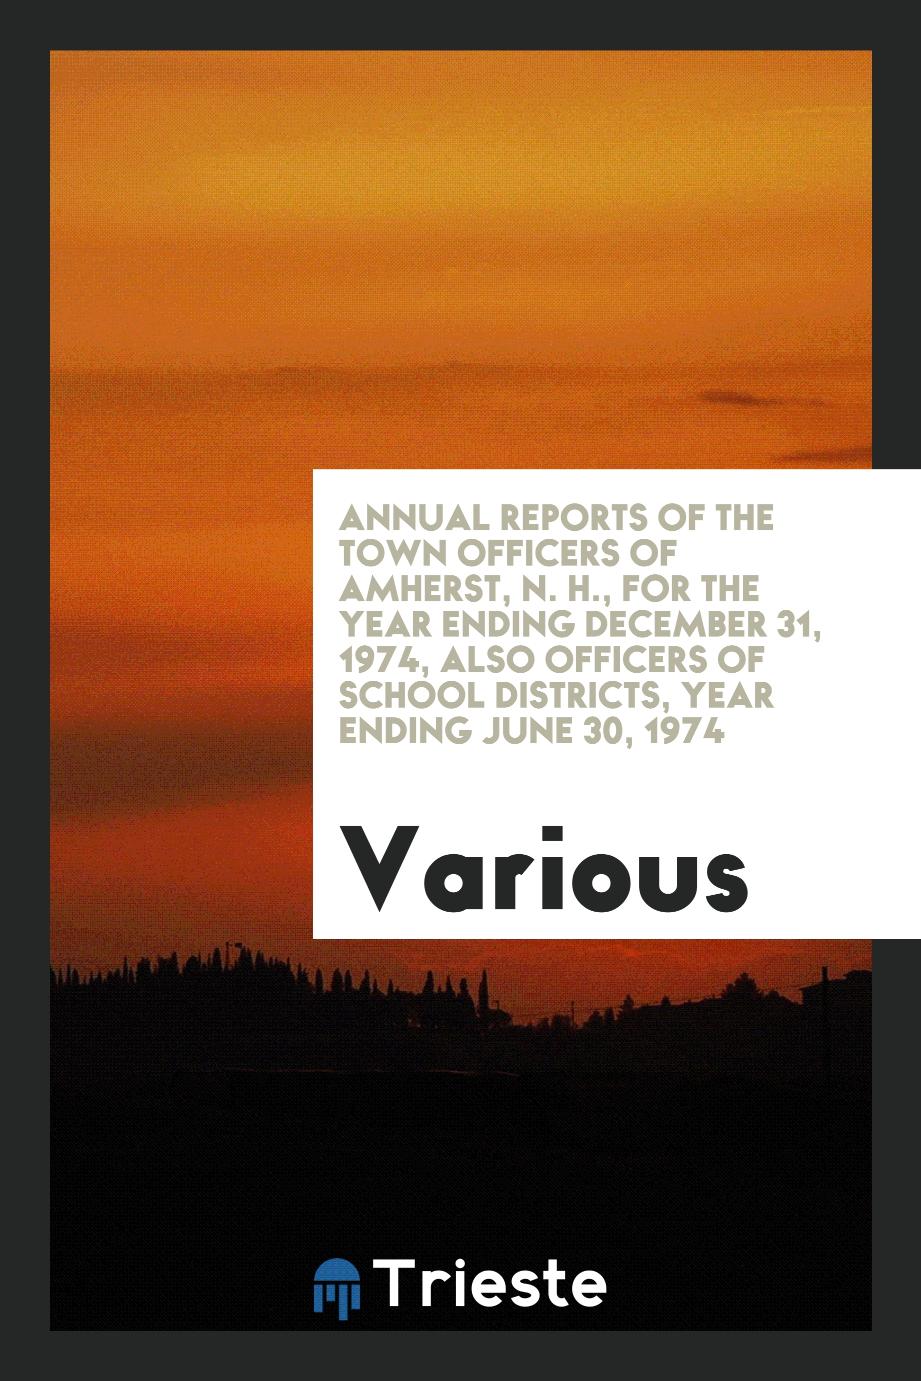 Annual reports of the town officers of Amherst, N. H., for the Year ending December 31, 1974, also officers of School districts, year ending June 30, 1974